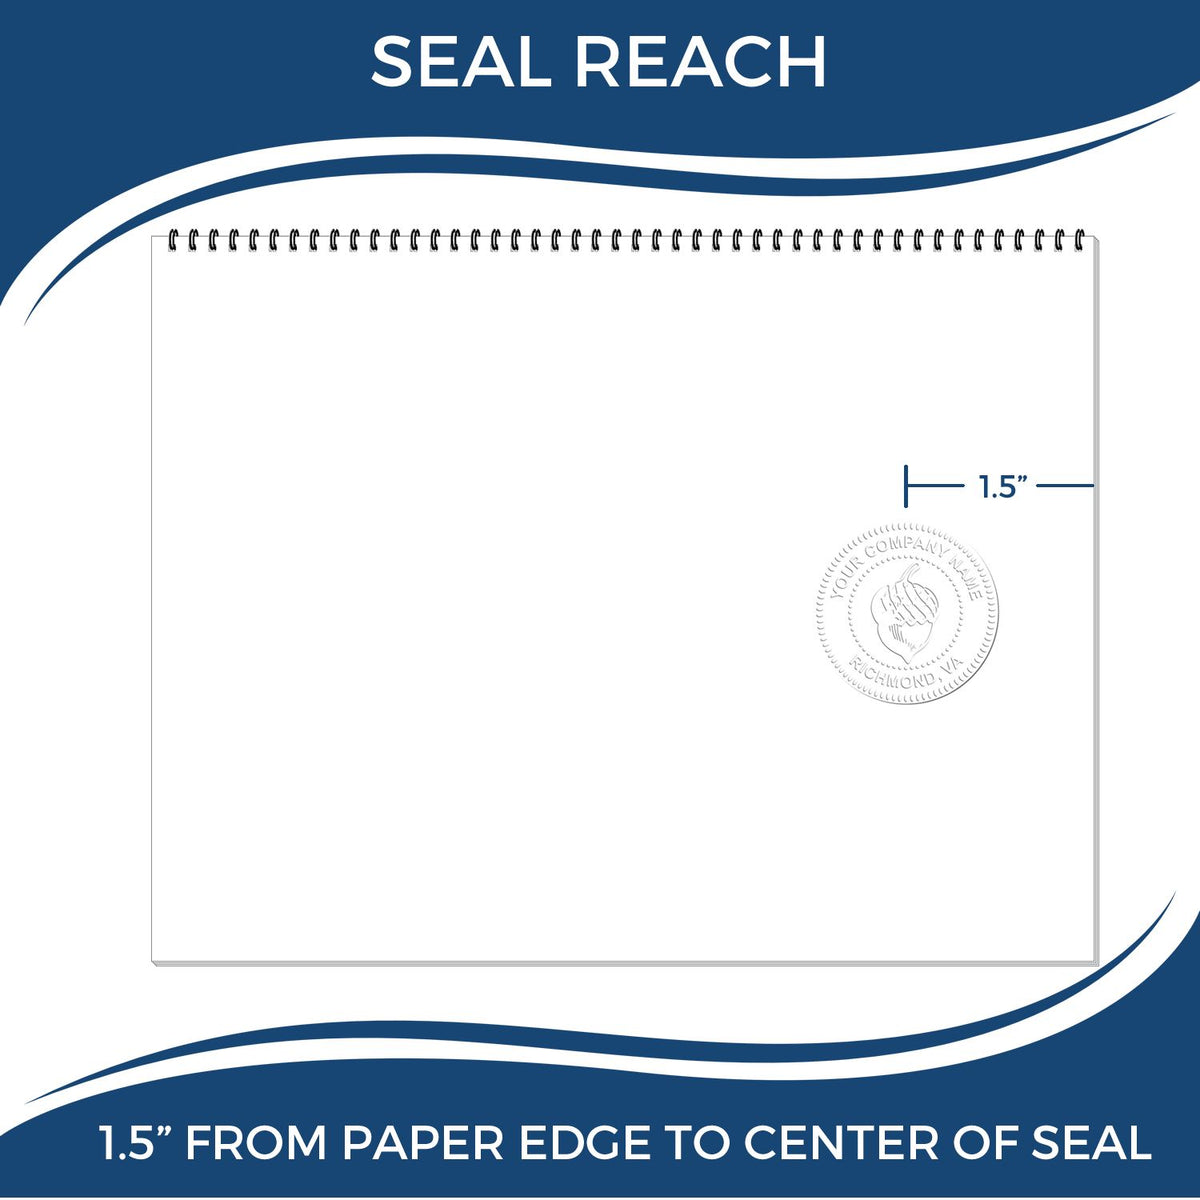 An infographic showing the seal reach which is represented by a ruler and a miniature seal image of the Handheld Alaska Professional Geologist Embosser